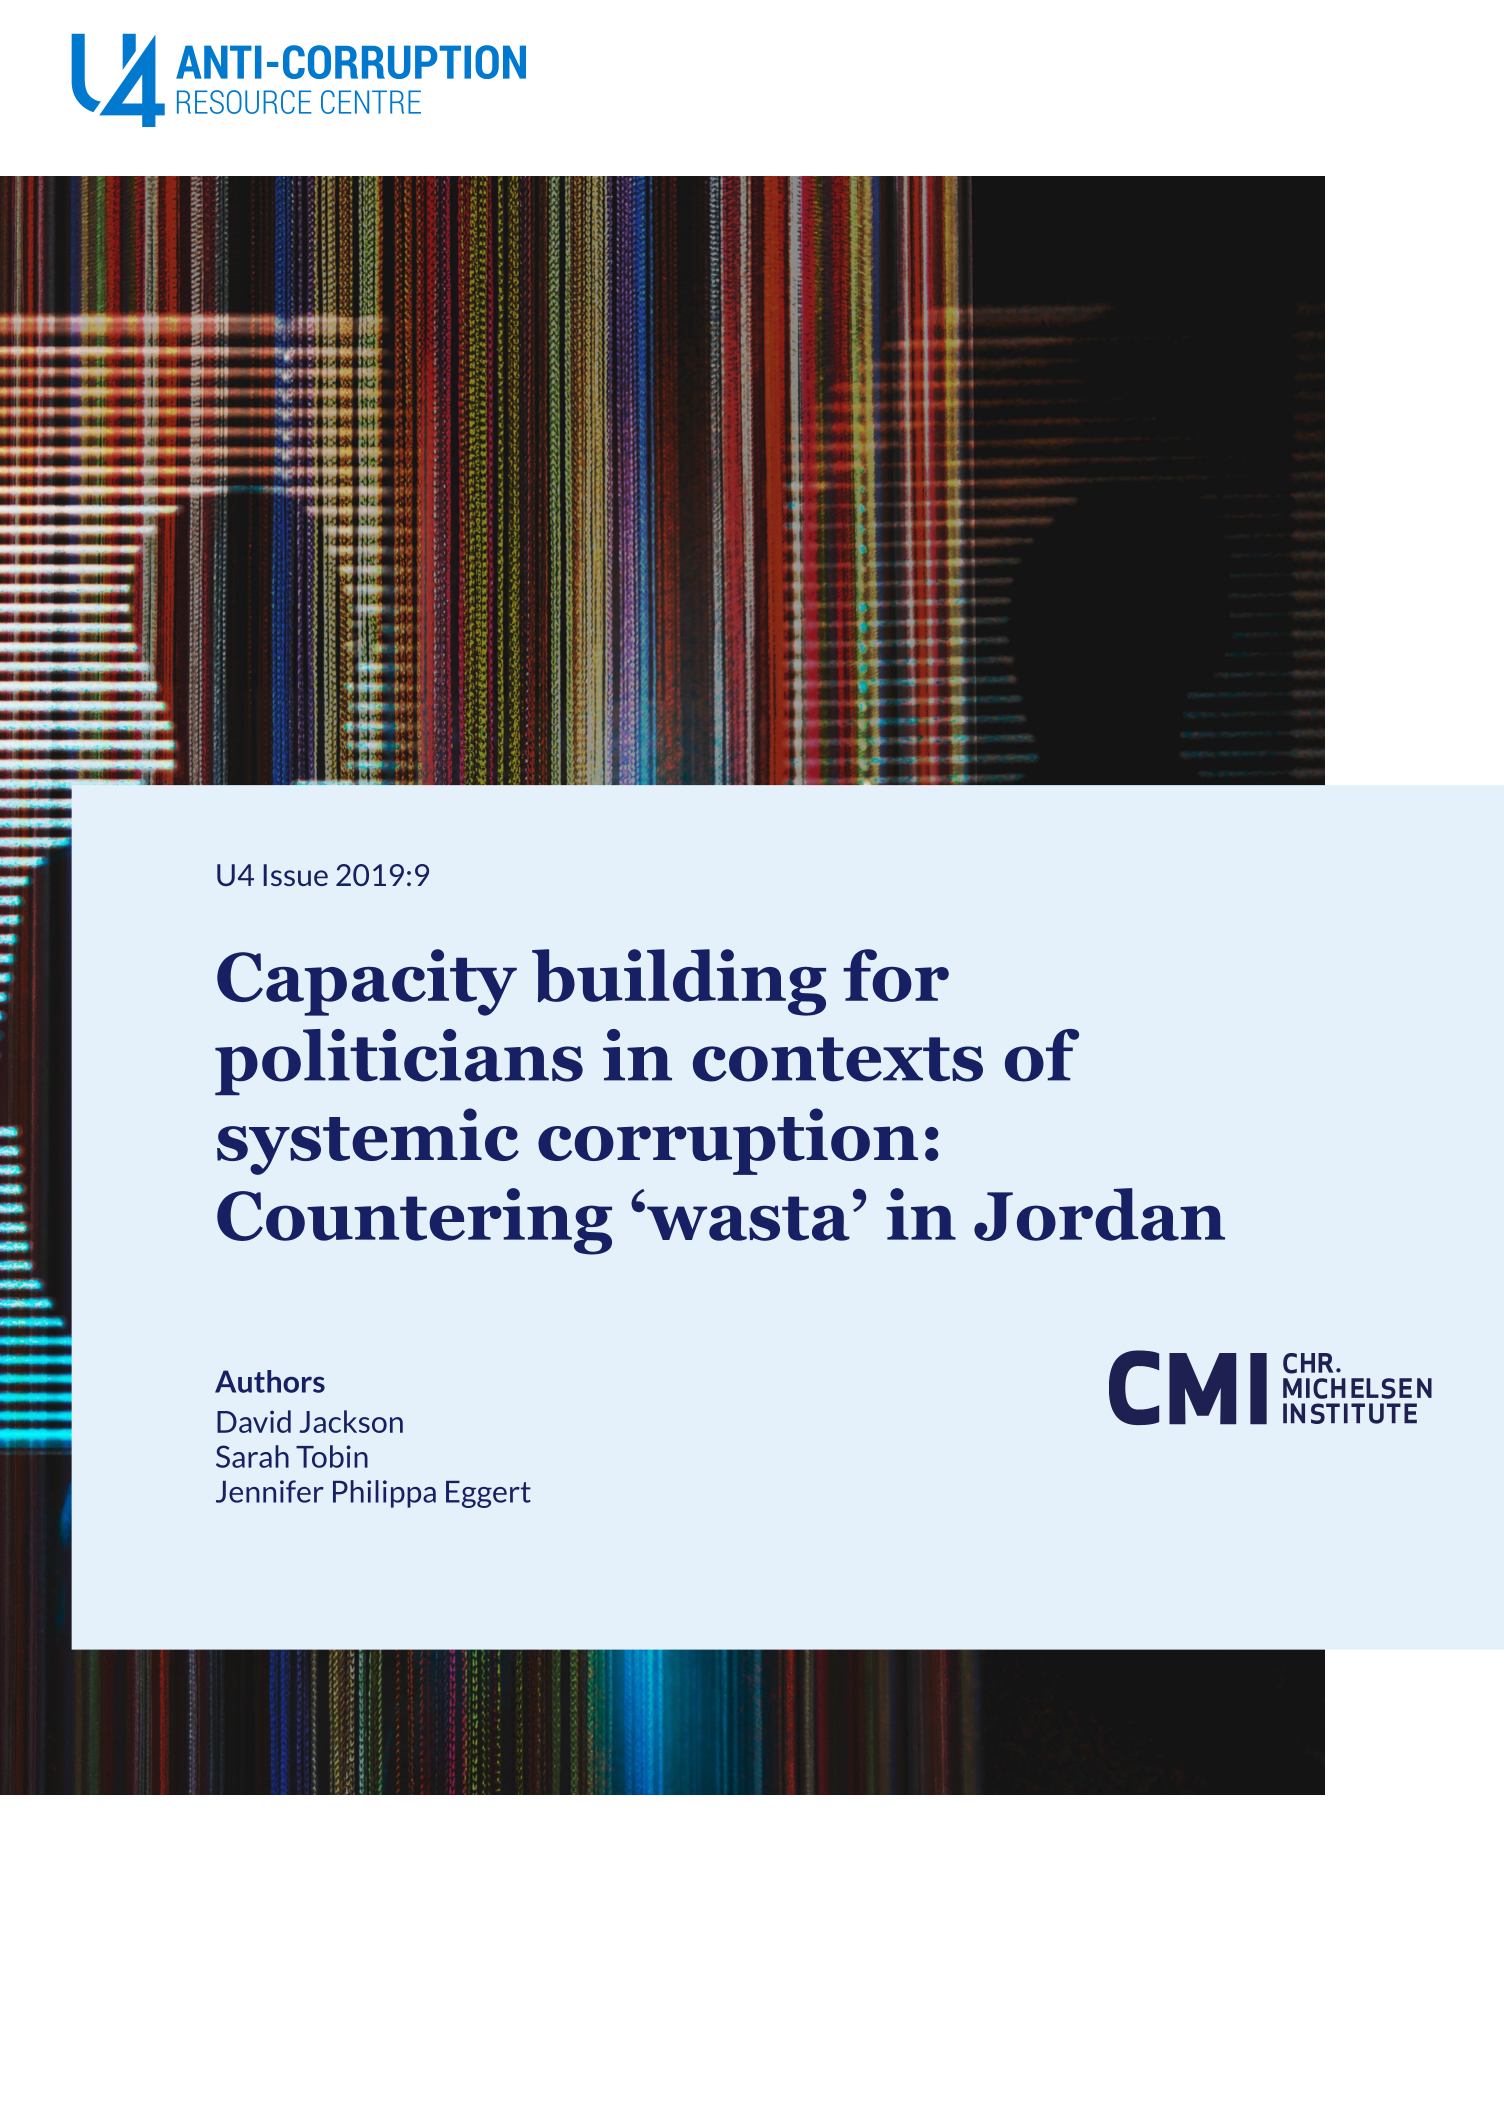 Capacity building for politicians in contexts of systemic corruption: Countering ‘wasta’ in Jordan